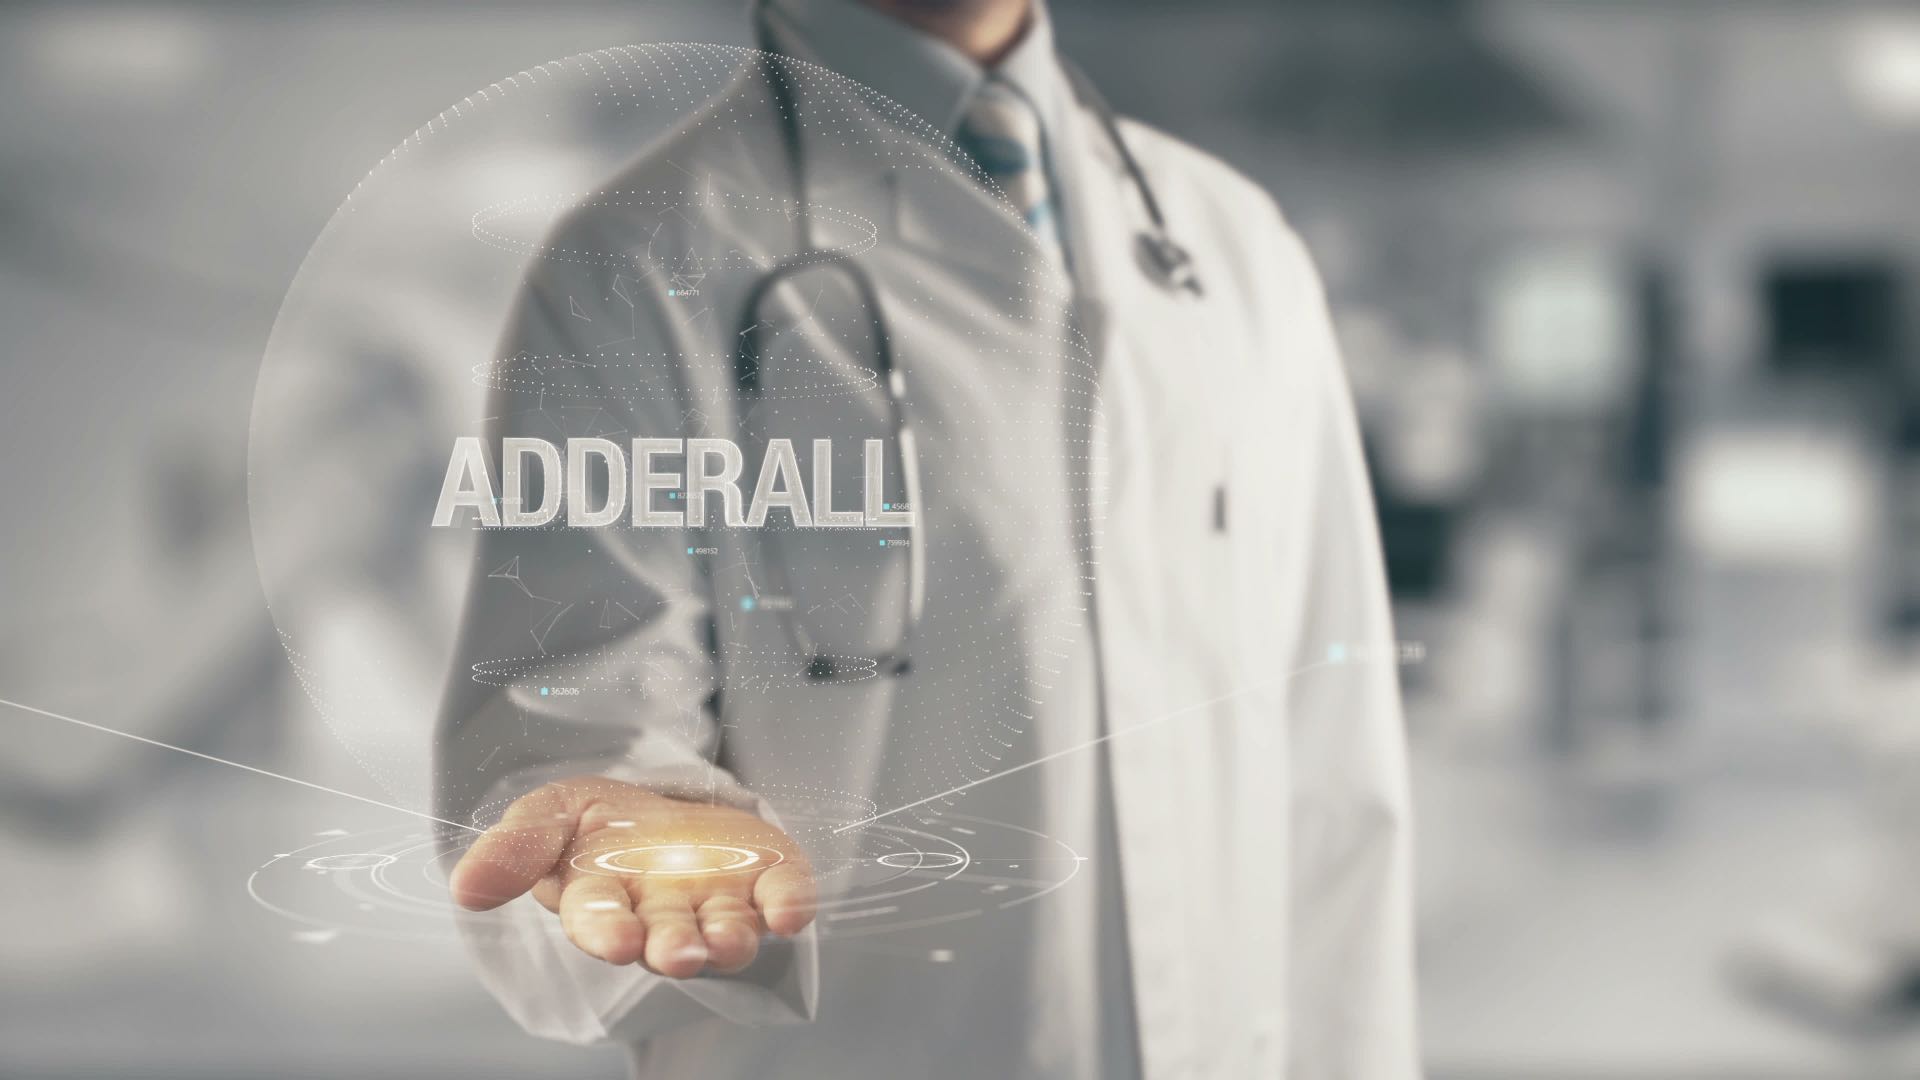 adderall addiction is a serious problem and treatable